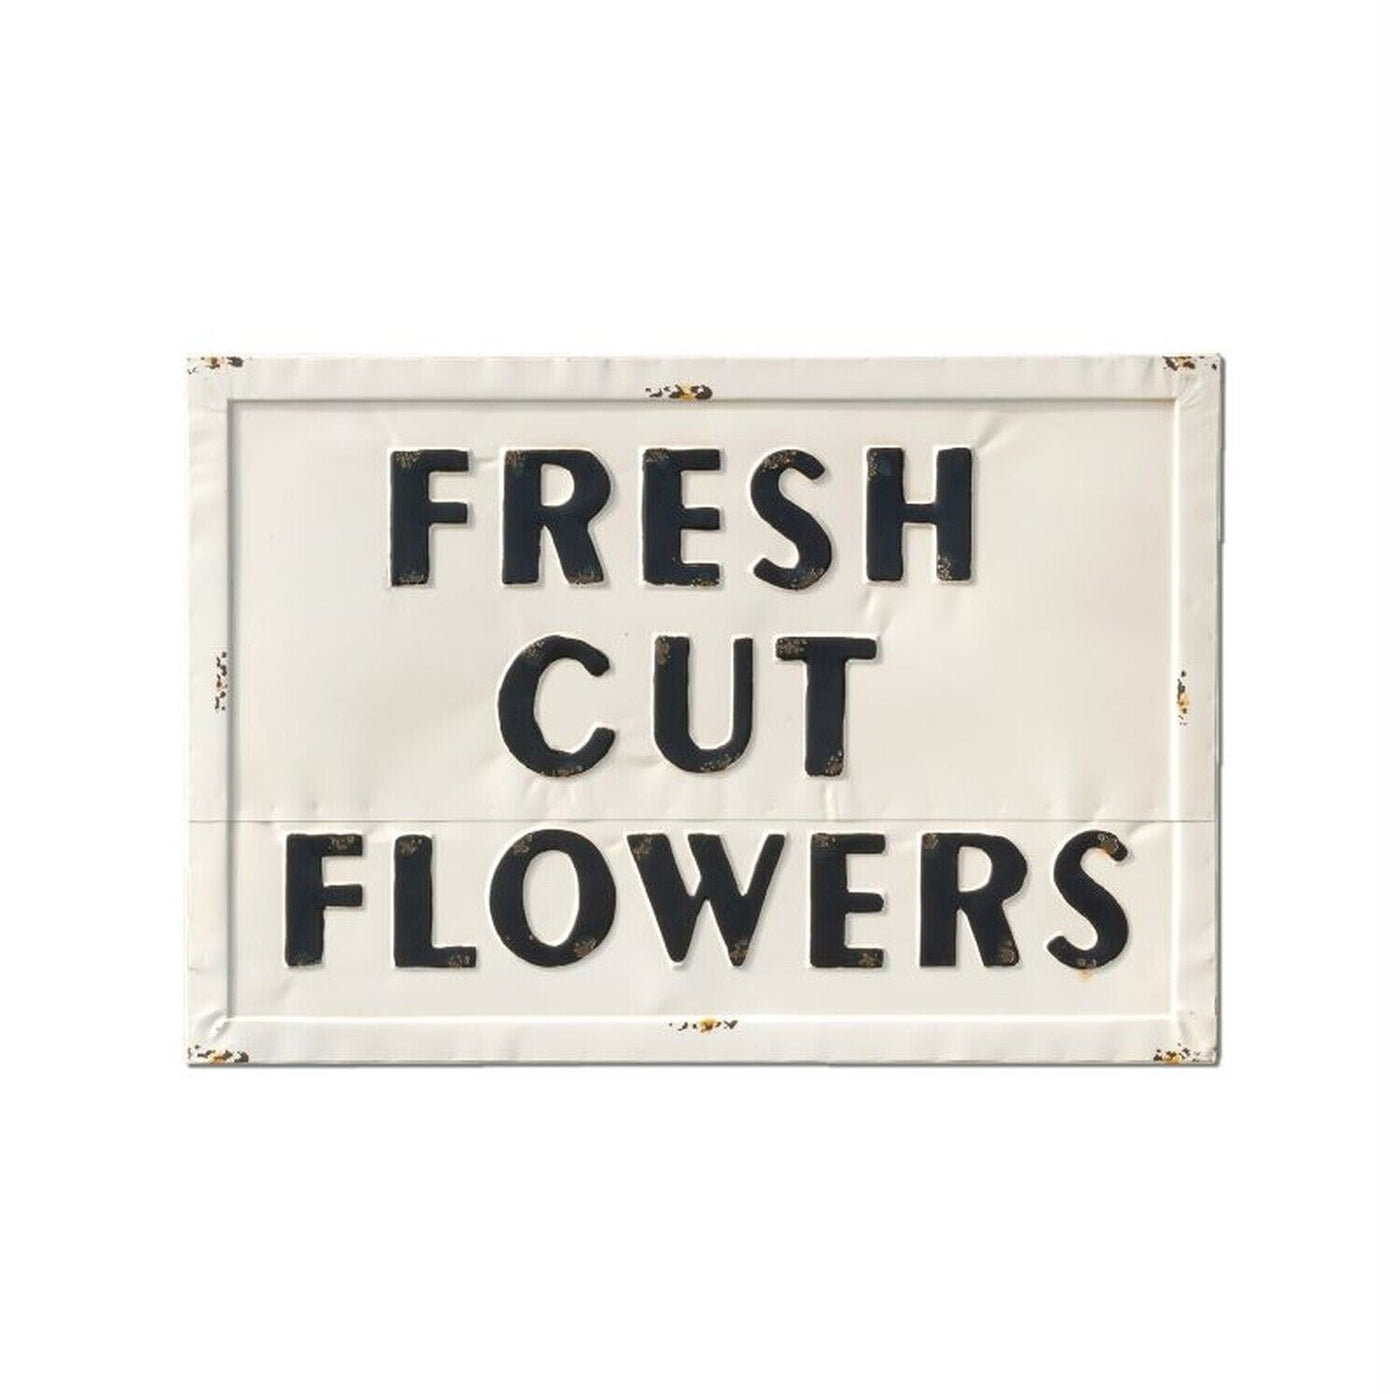 Embossed Metal Fresh Cut Flowers Sign by Park Hill Collections, #EWA80544, 28" x 20" - At Avalon Willow Home